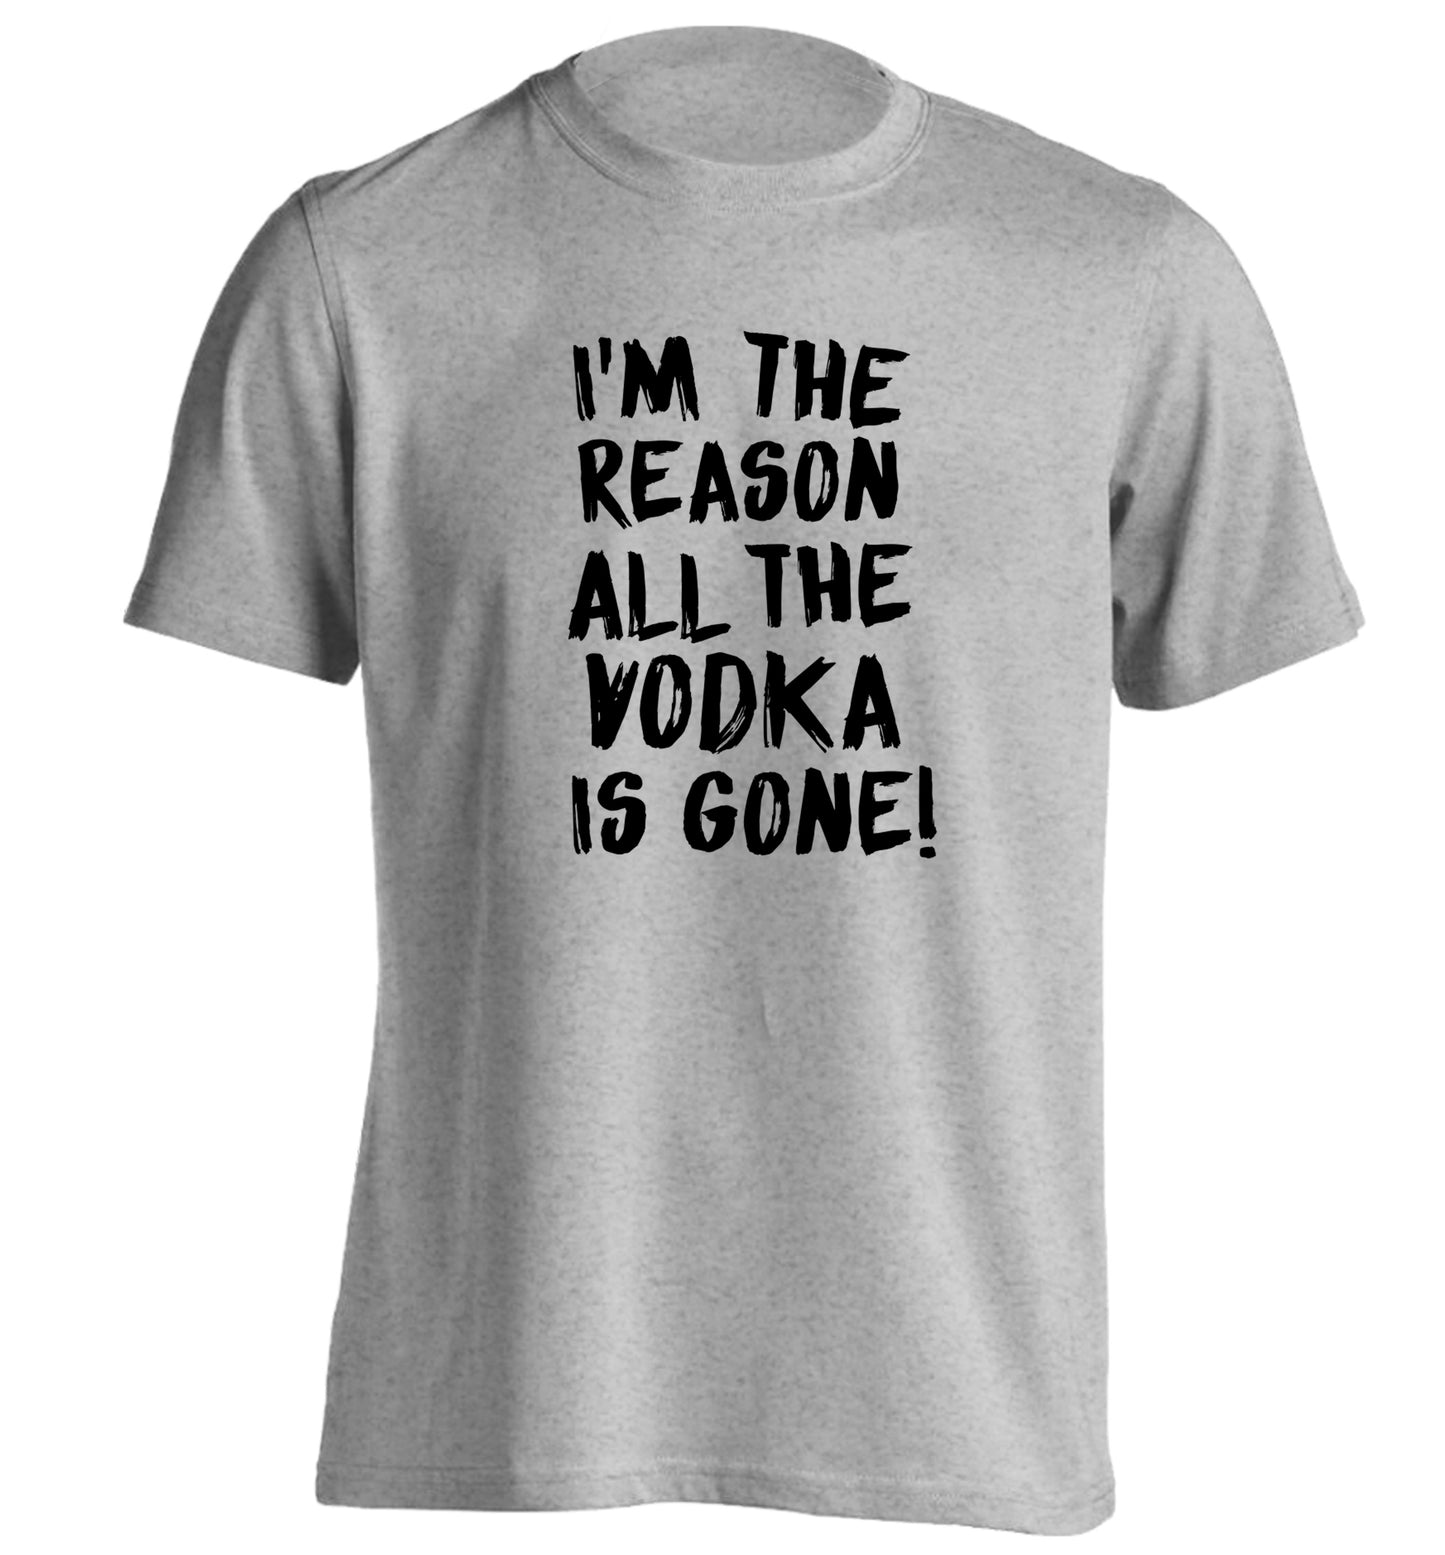 I'm the reason all the tequila is gone adults unisex grey Tshirt 2XL